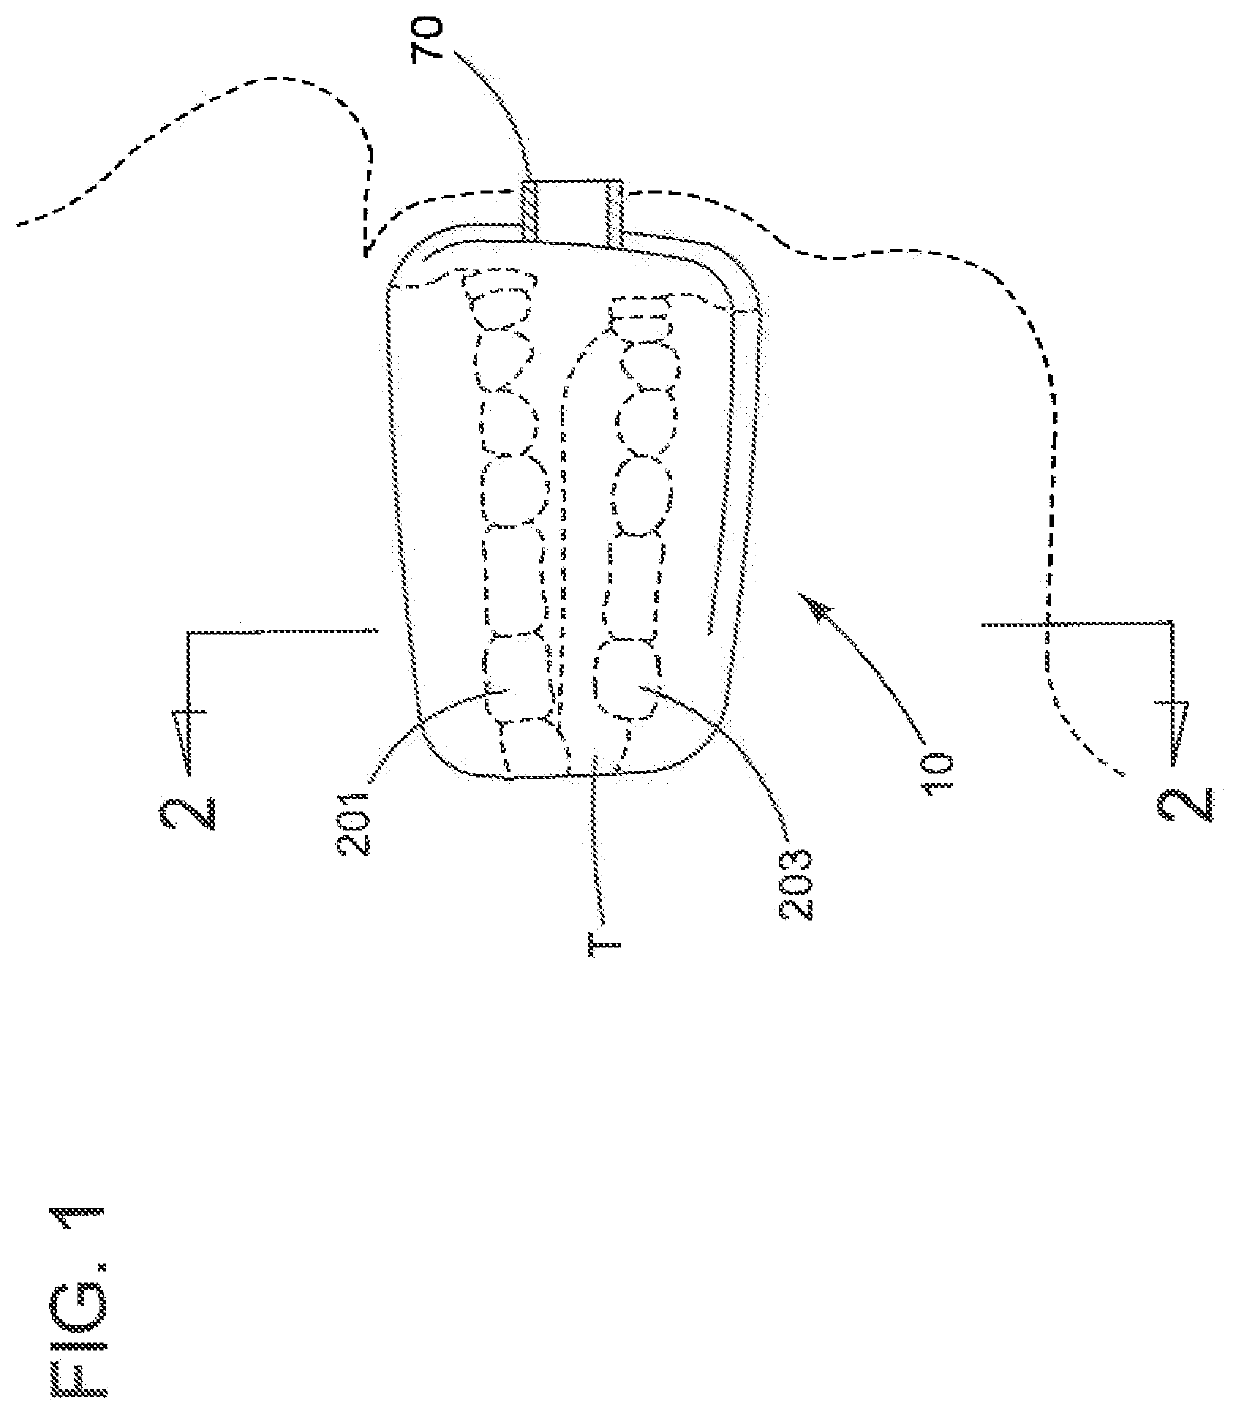 Mouth piece for cooling of oral tissue of a user during therapeutic treatment